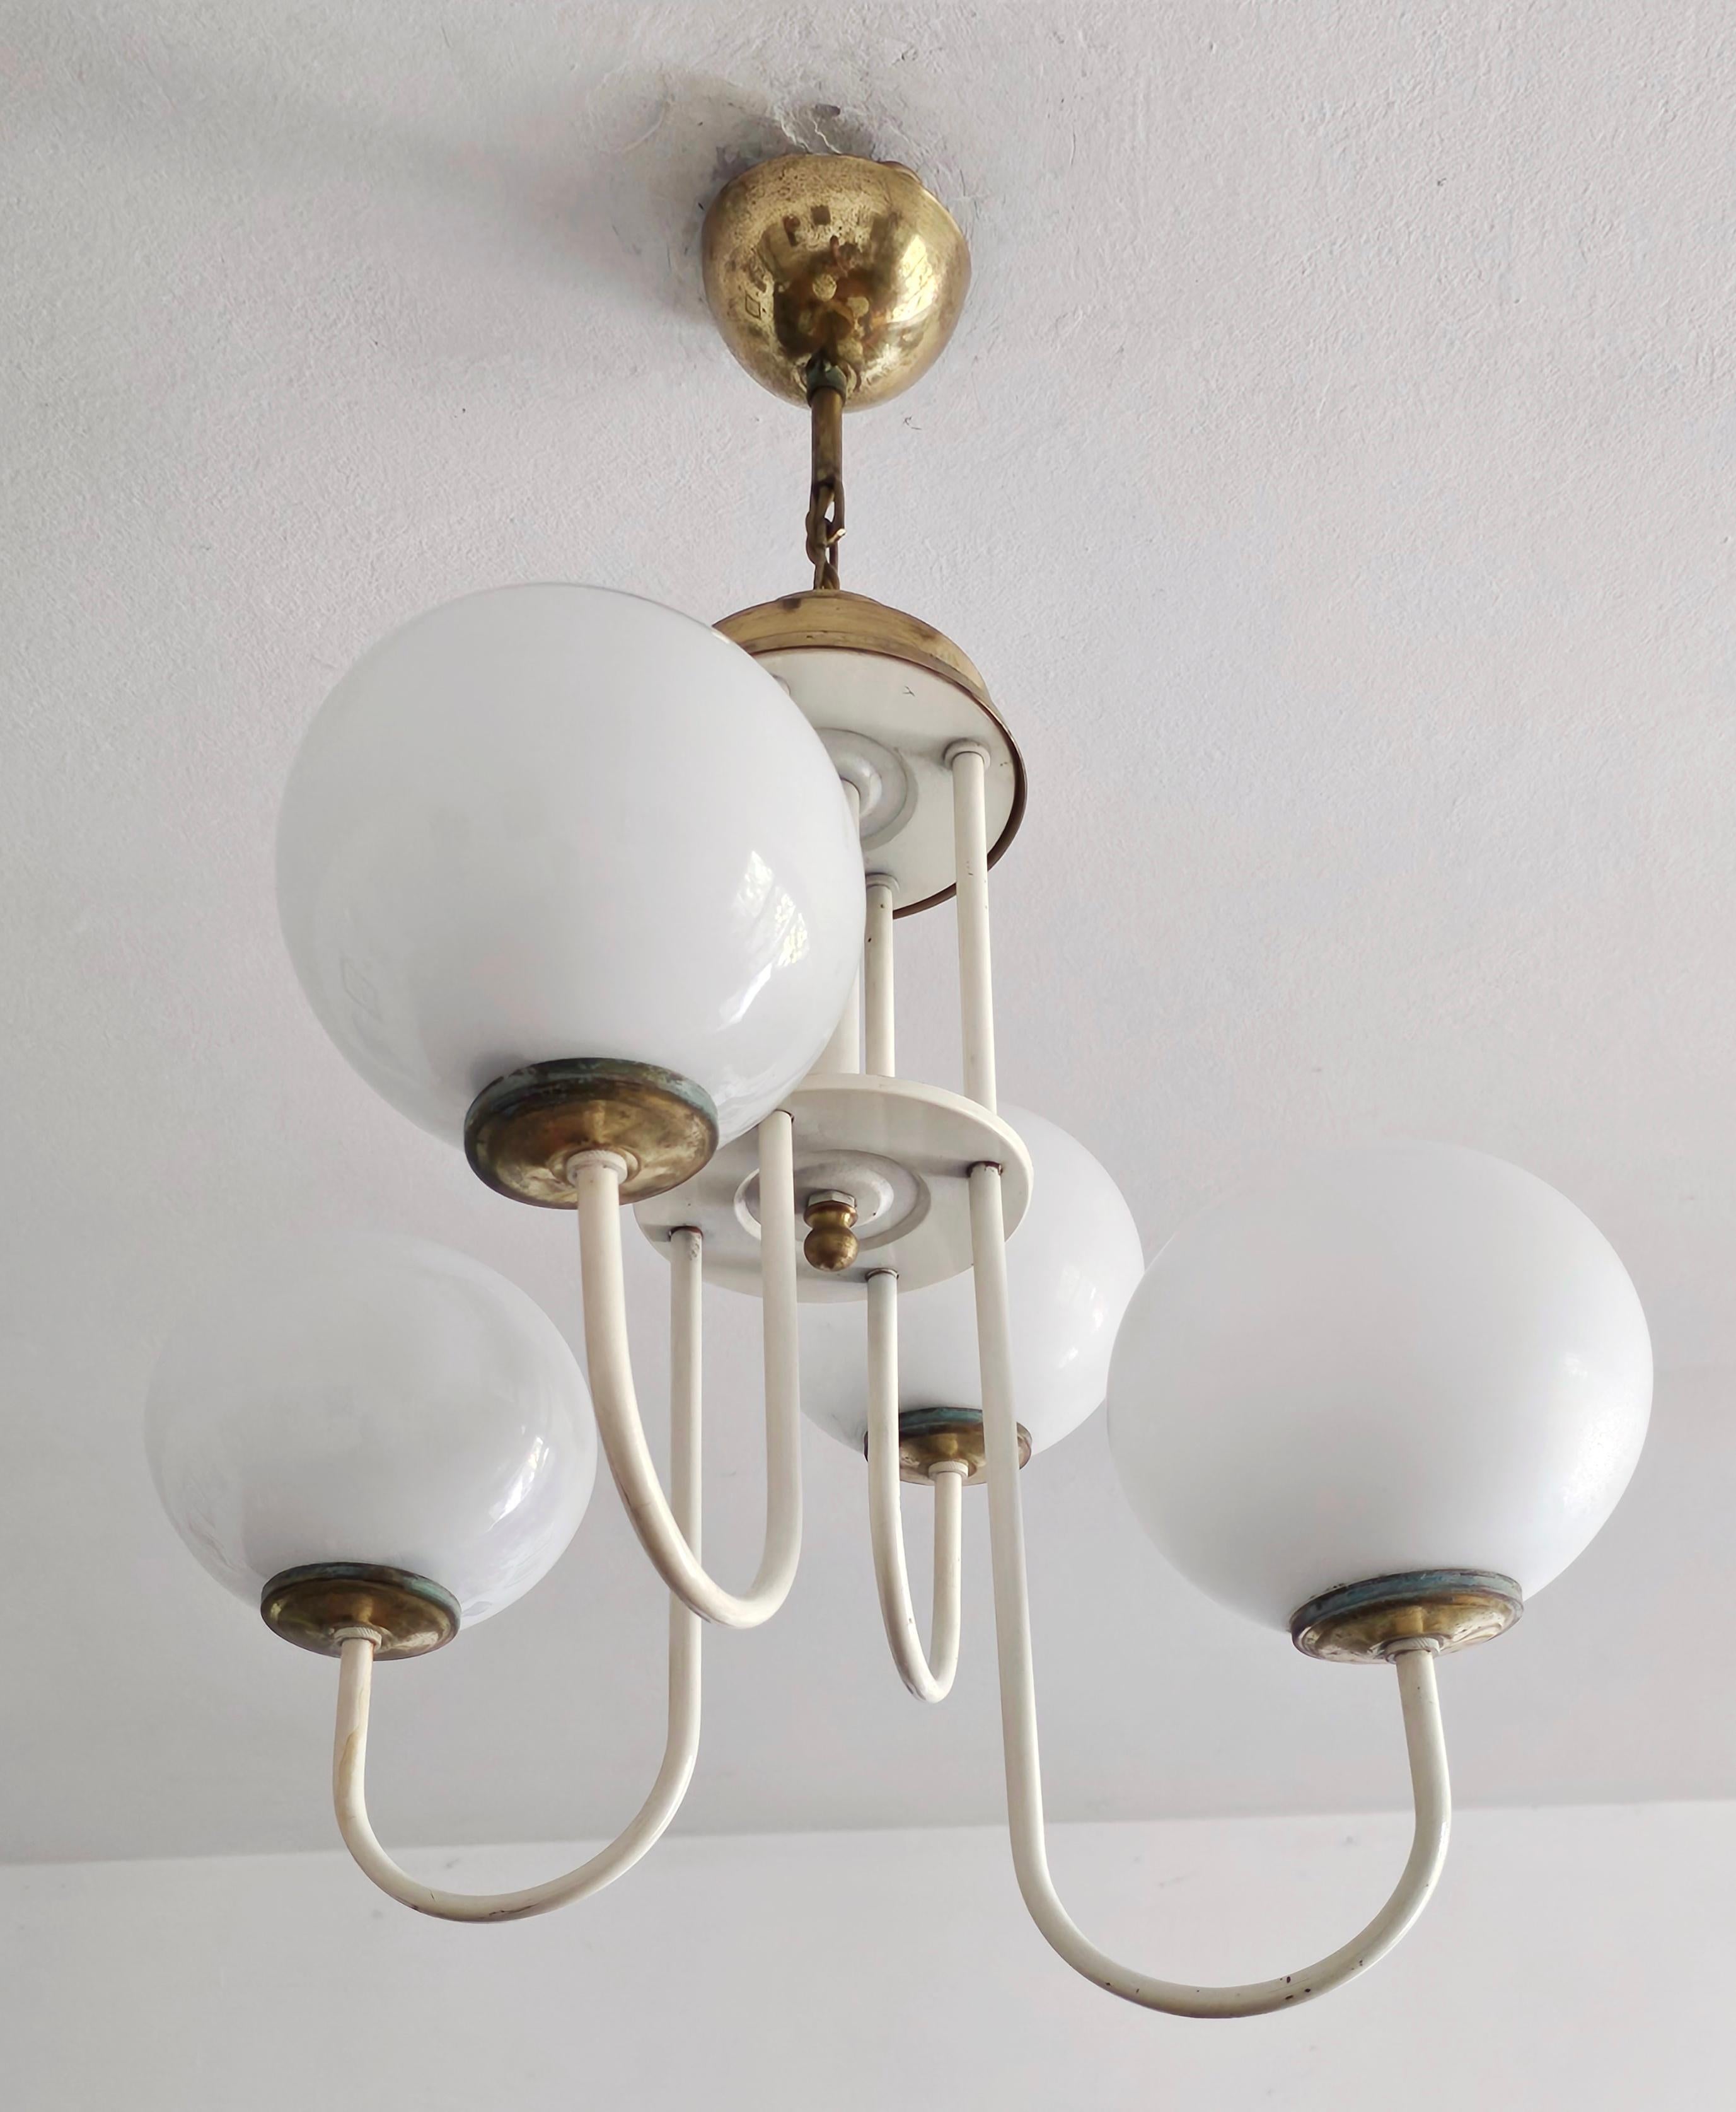 Rare Mid Century Modern Chandelier with Opaline Glass Balls, Italy 1960s In Good Condition For Sale In Beograd, RS